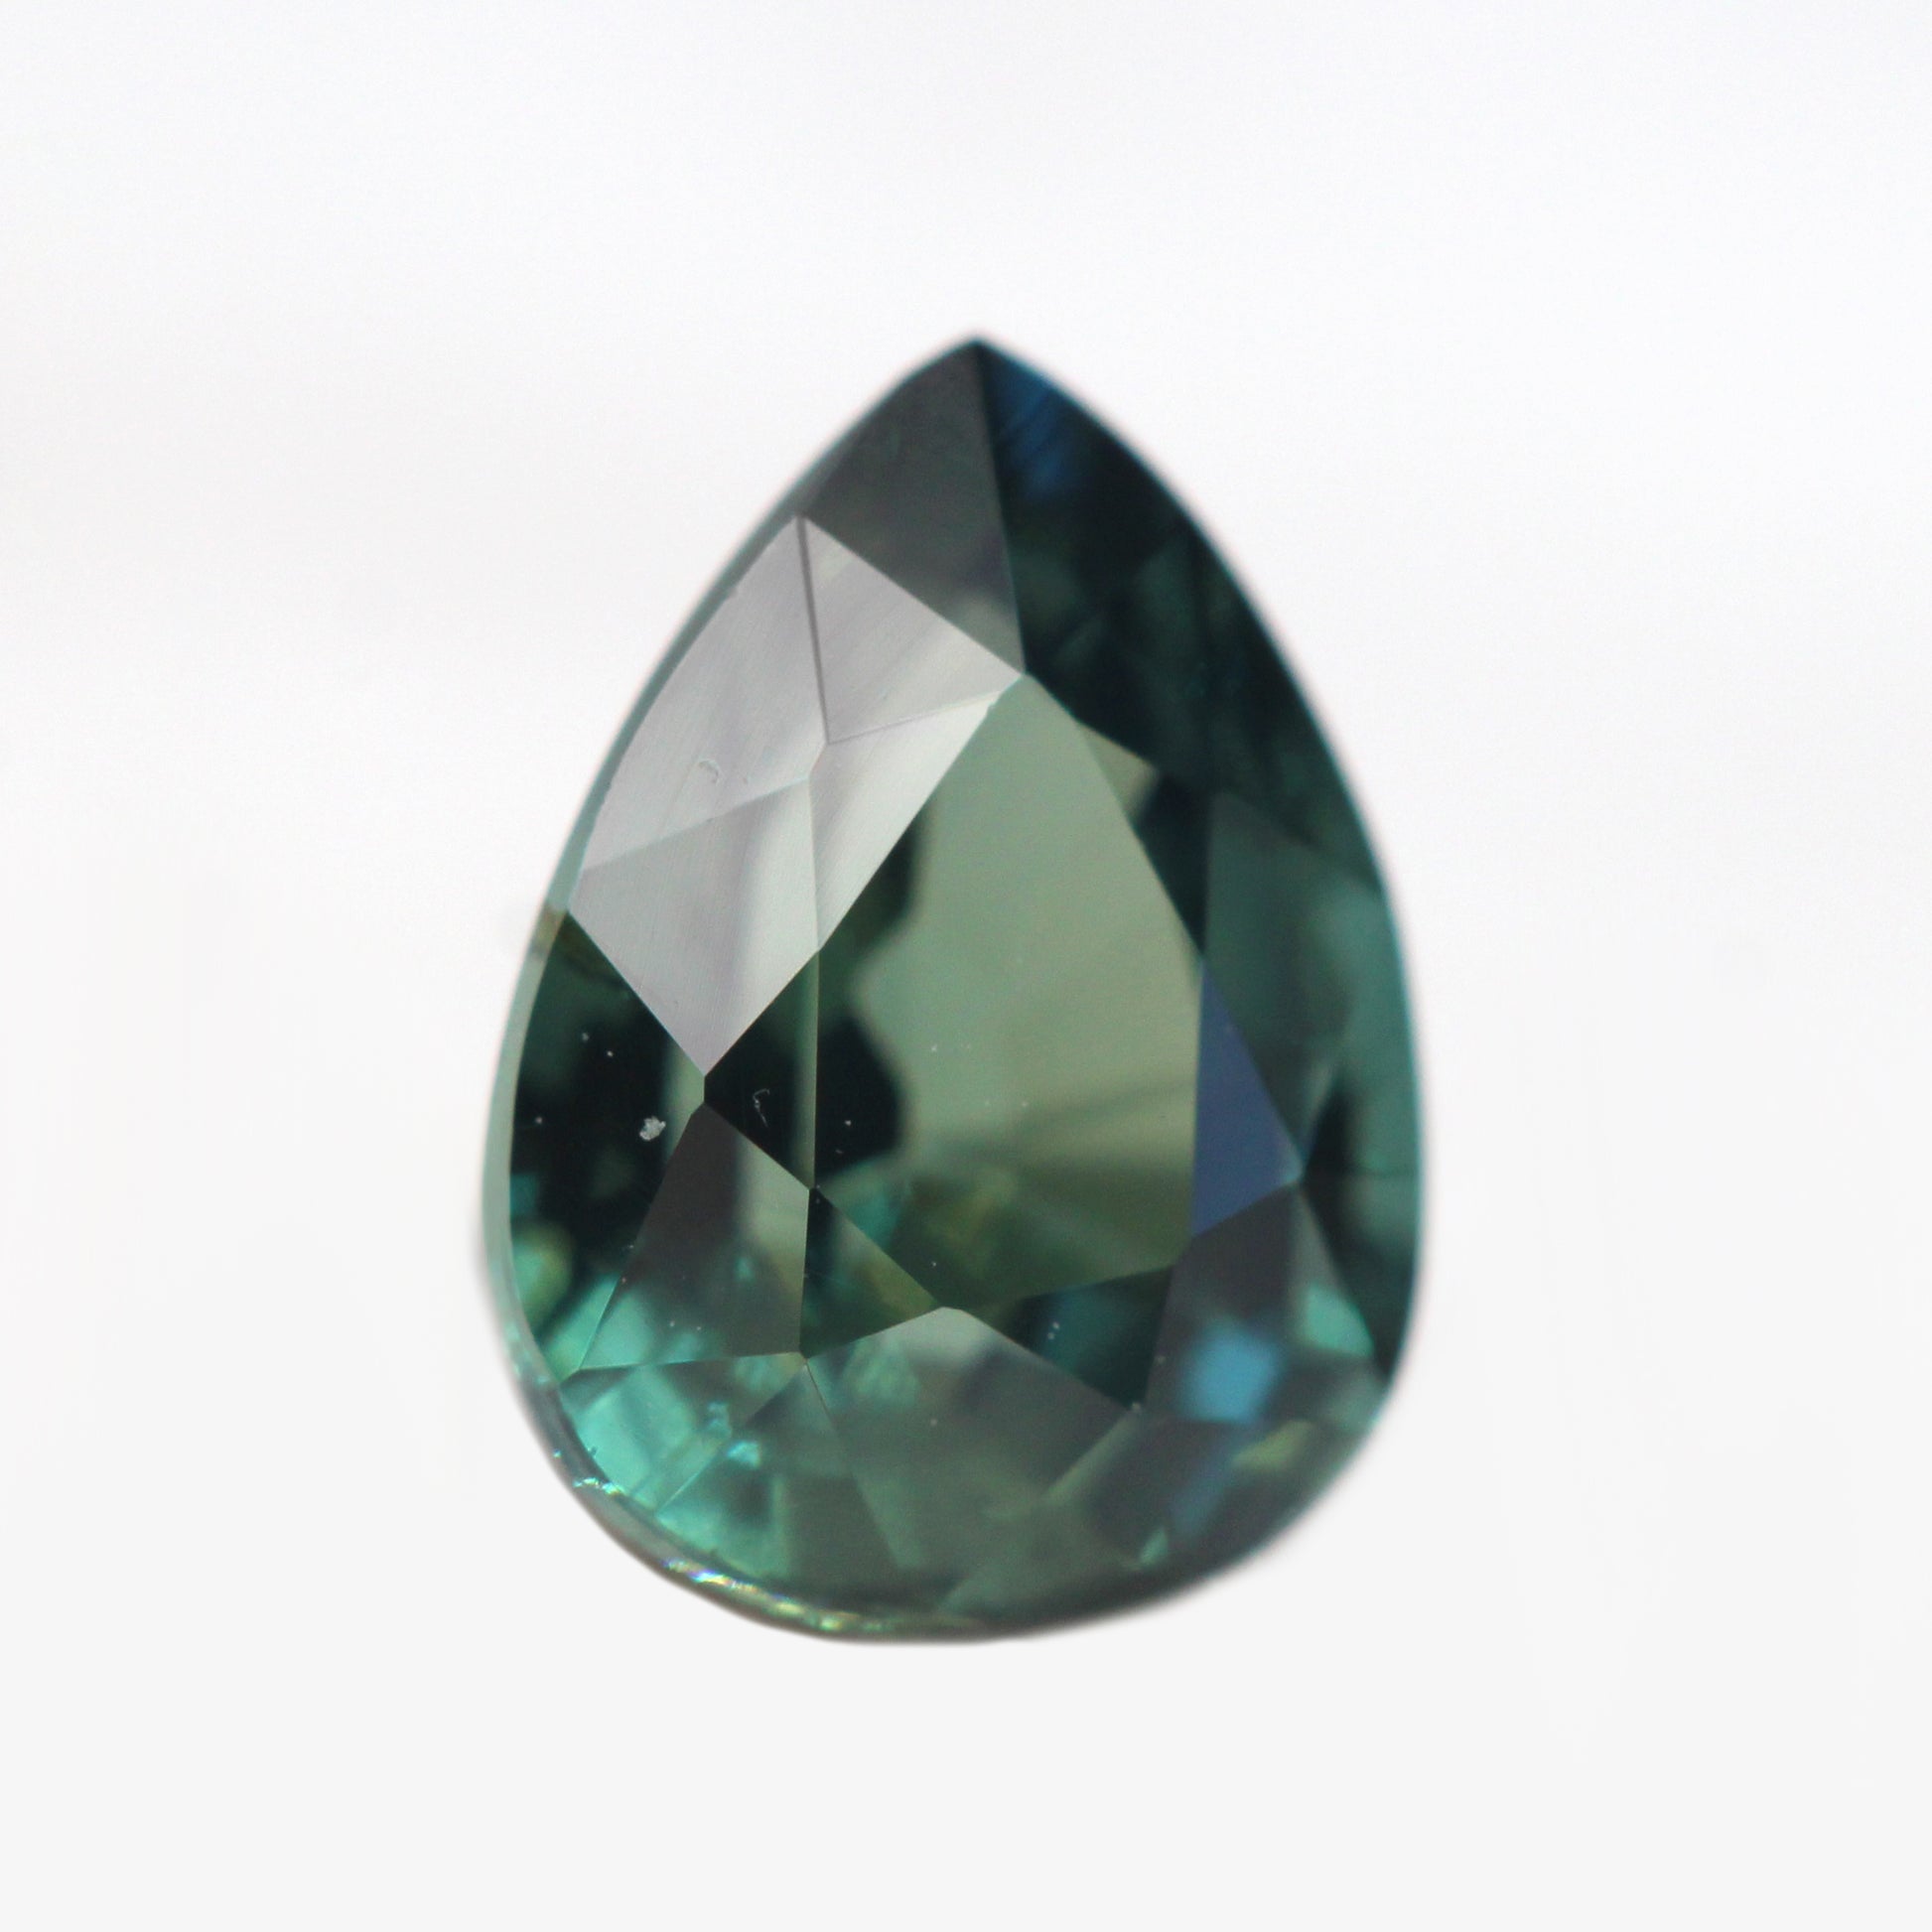 0.98 Carat Teal Green Pear Madagascar Sapphire for Custom Work - Inventory Code TGPS098 - Midwinter Co. Alternative Bridal Rings and Modern Fine Jewelry